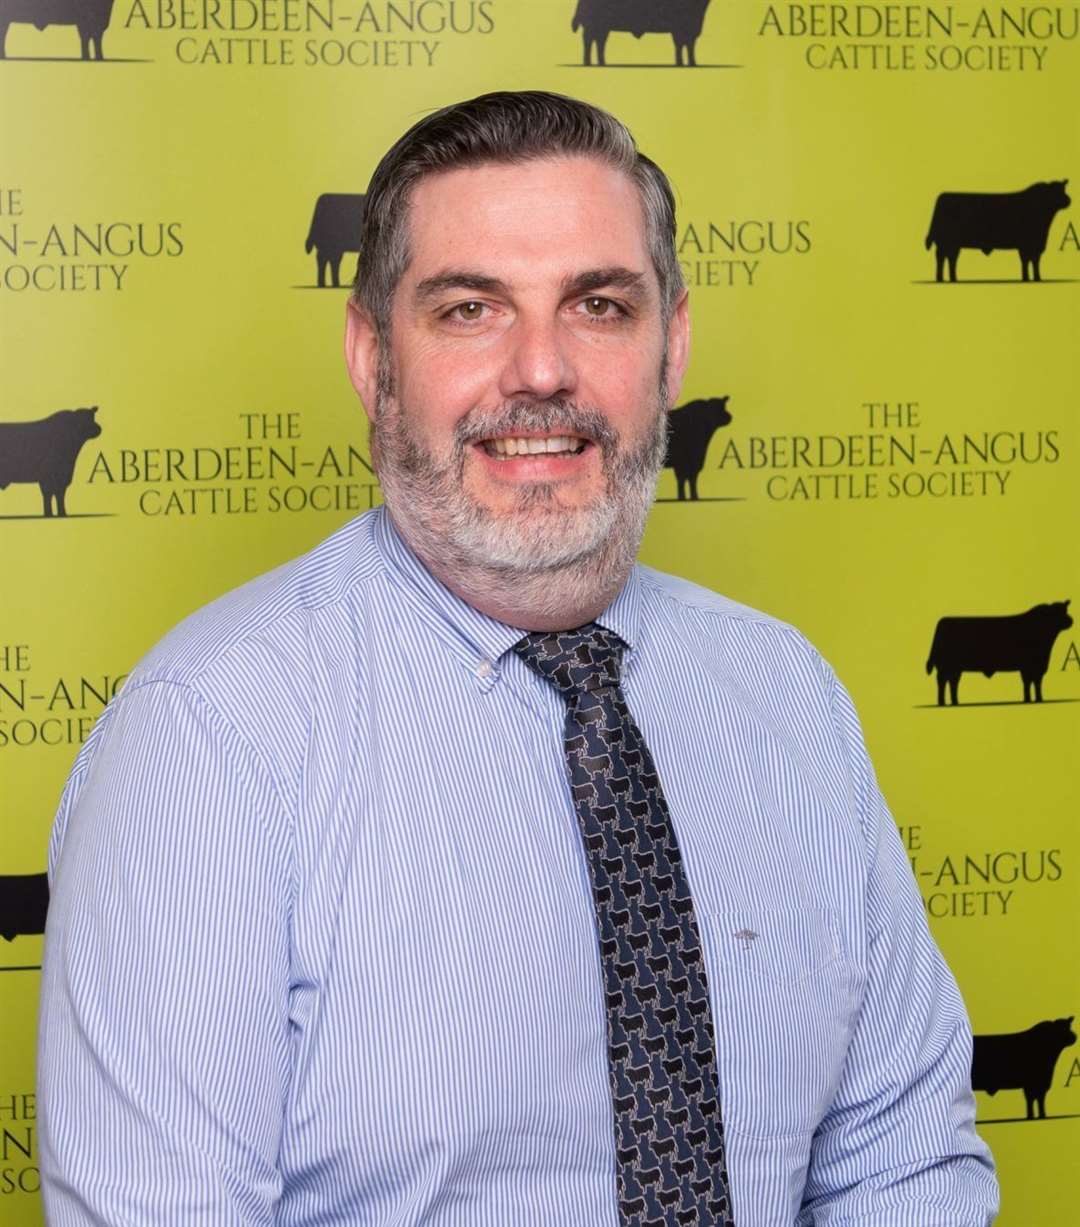 Robert Gilchrist new chief executive officer of the Aberdeen Angus Cattle Society